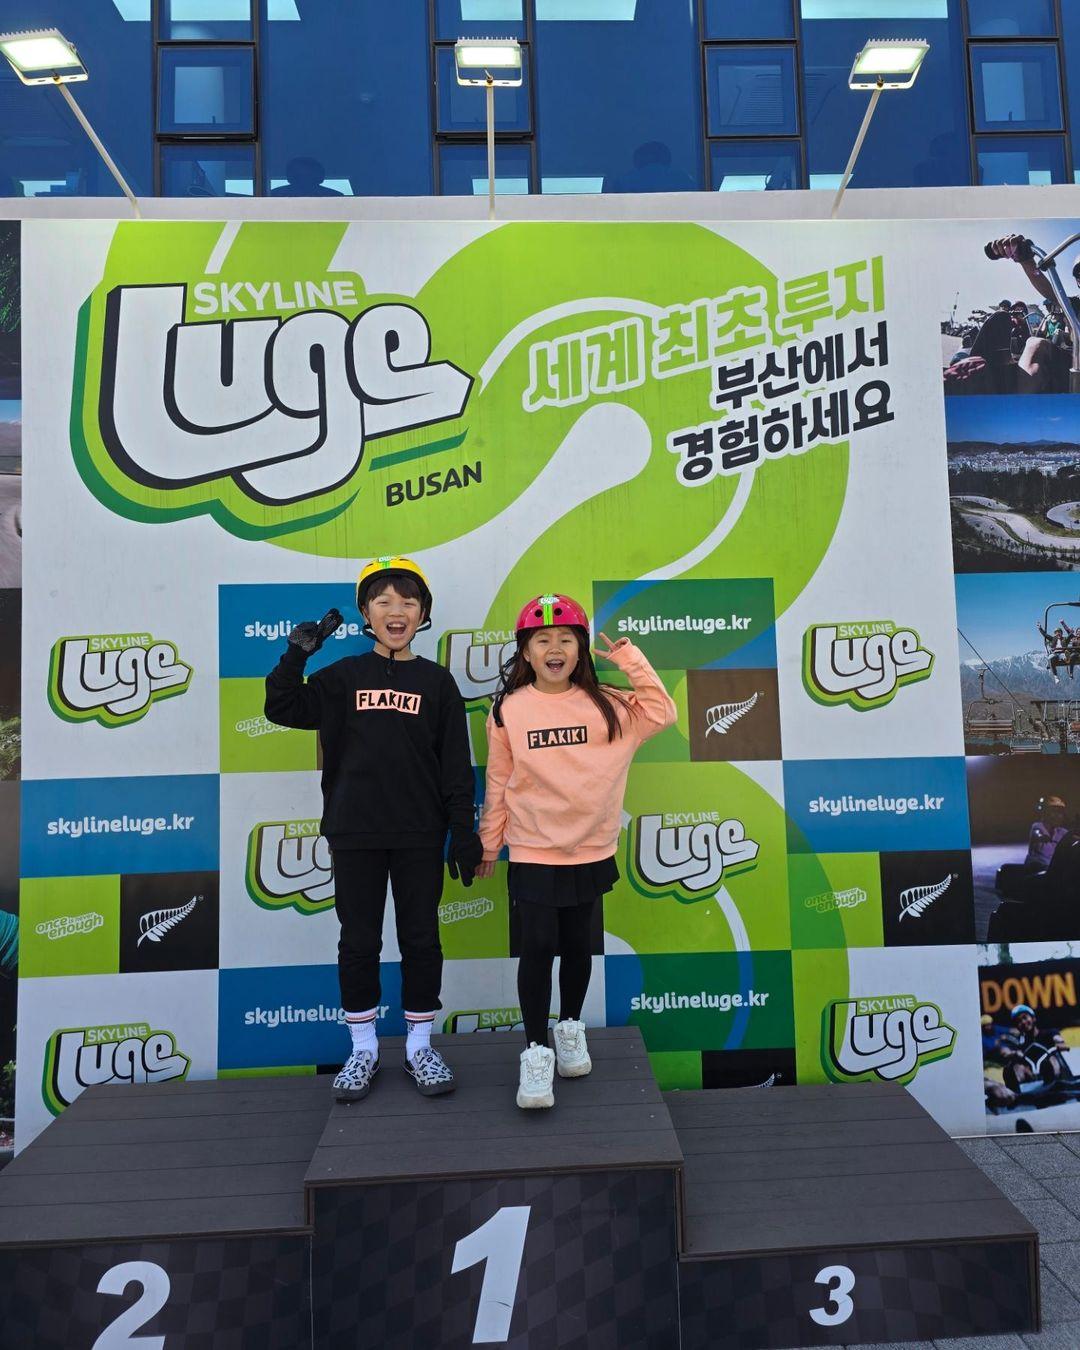 Two kids pose on the Luge podium at Skyline Luge Busan.